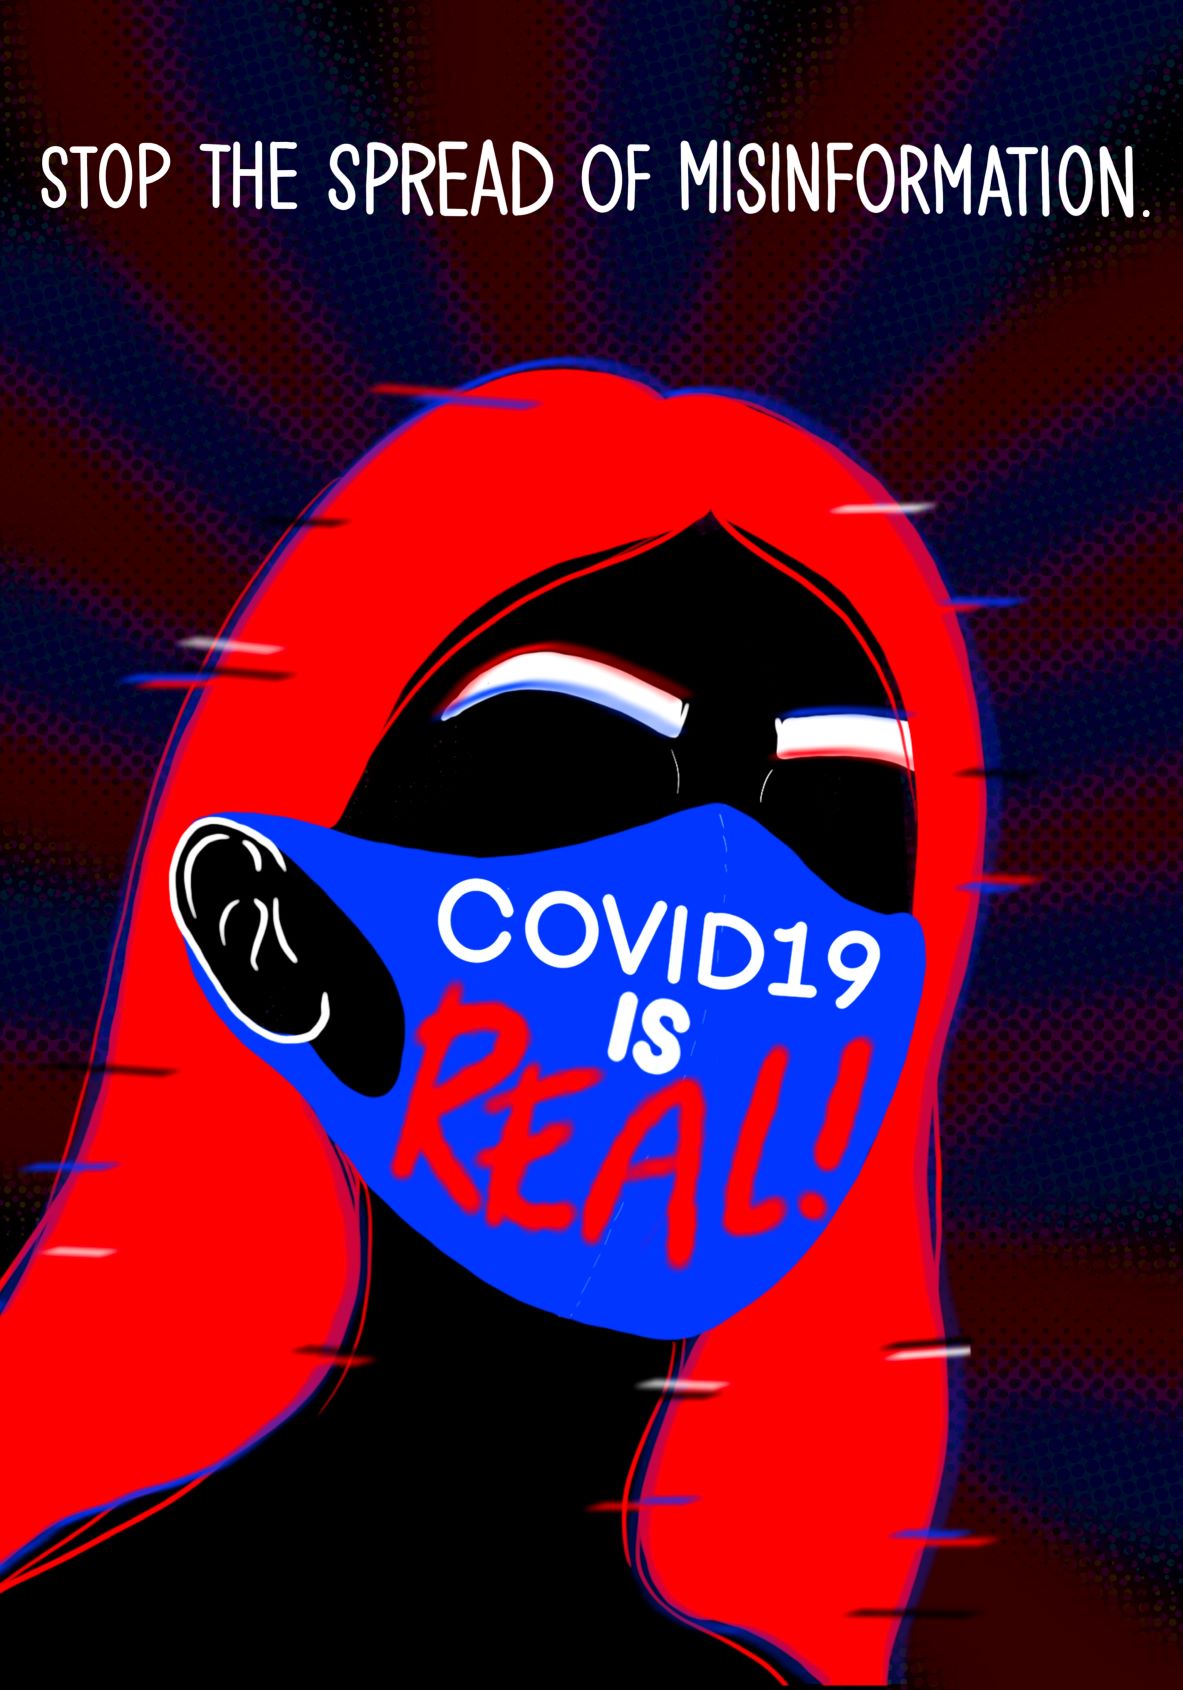 Image of woman wearing mask that says COVID-19 is real, with title: Stop the spread of misinformation